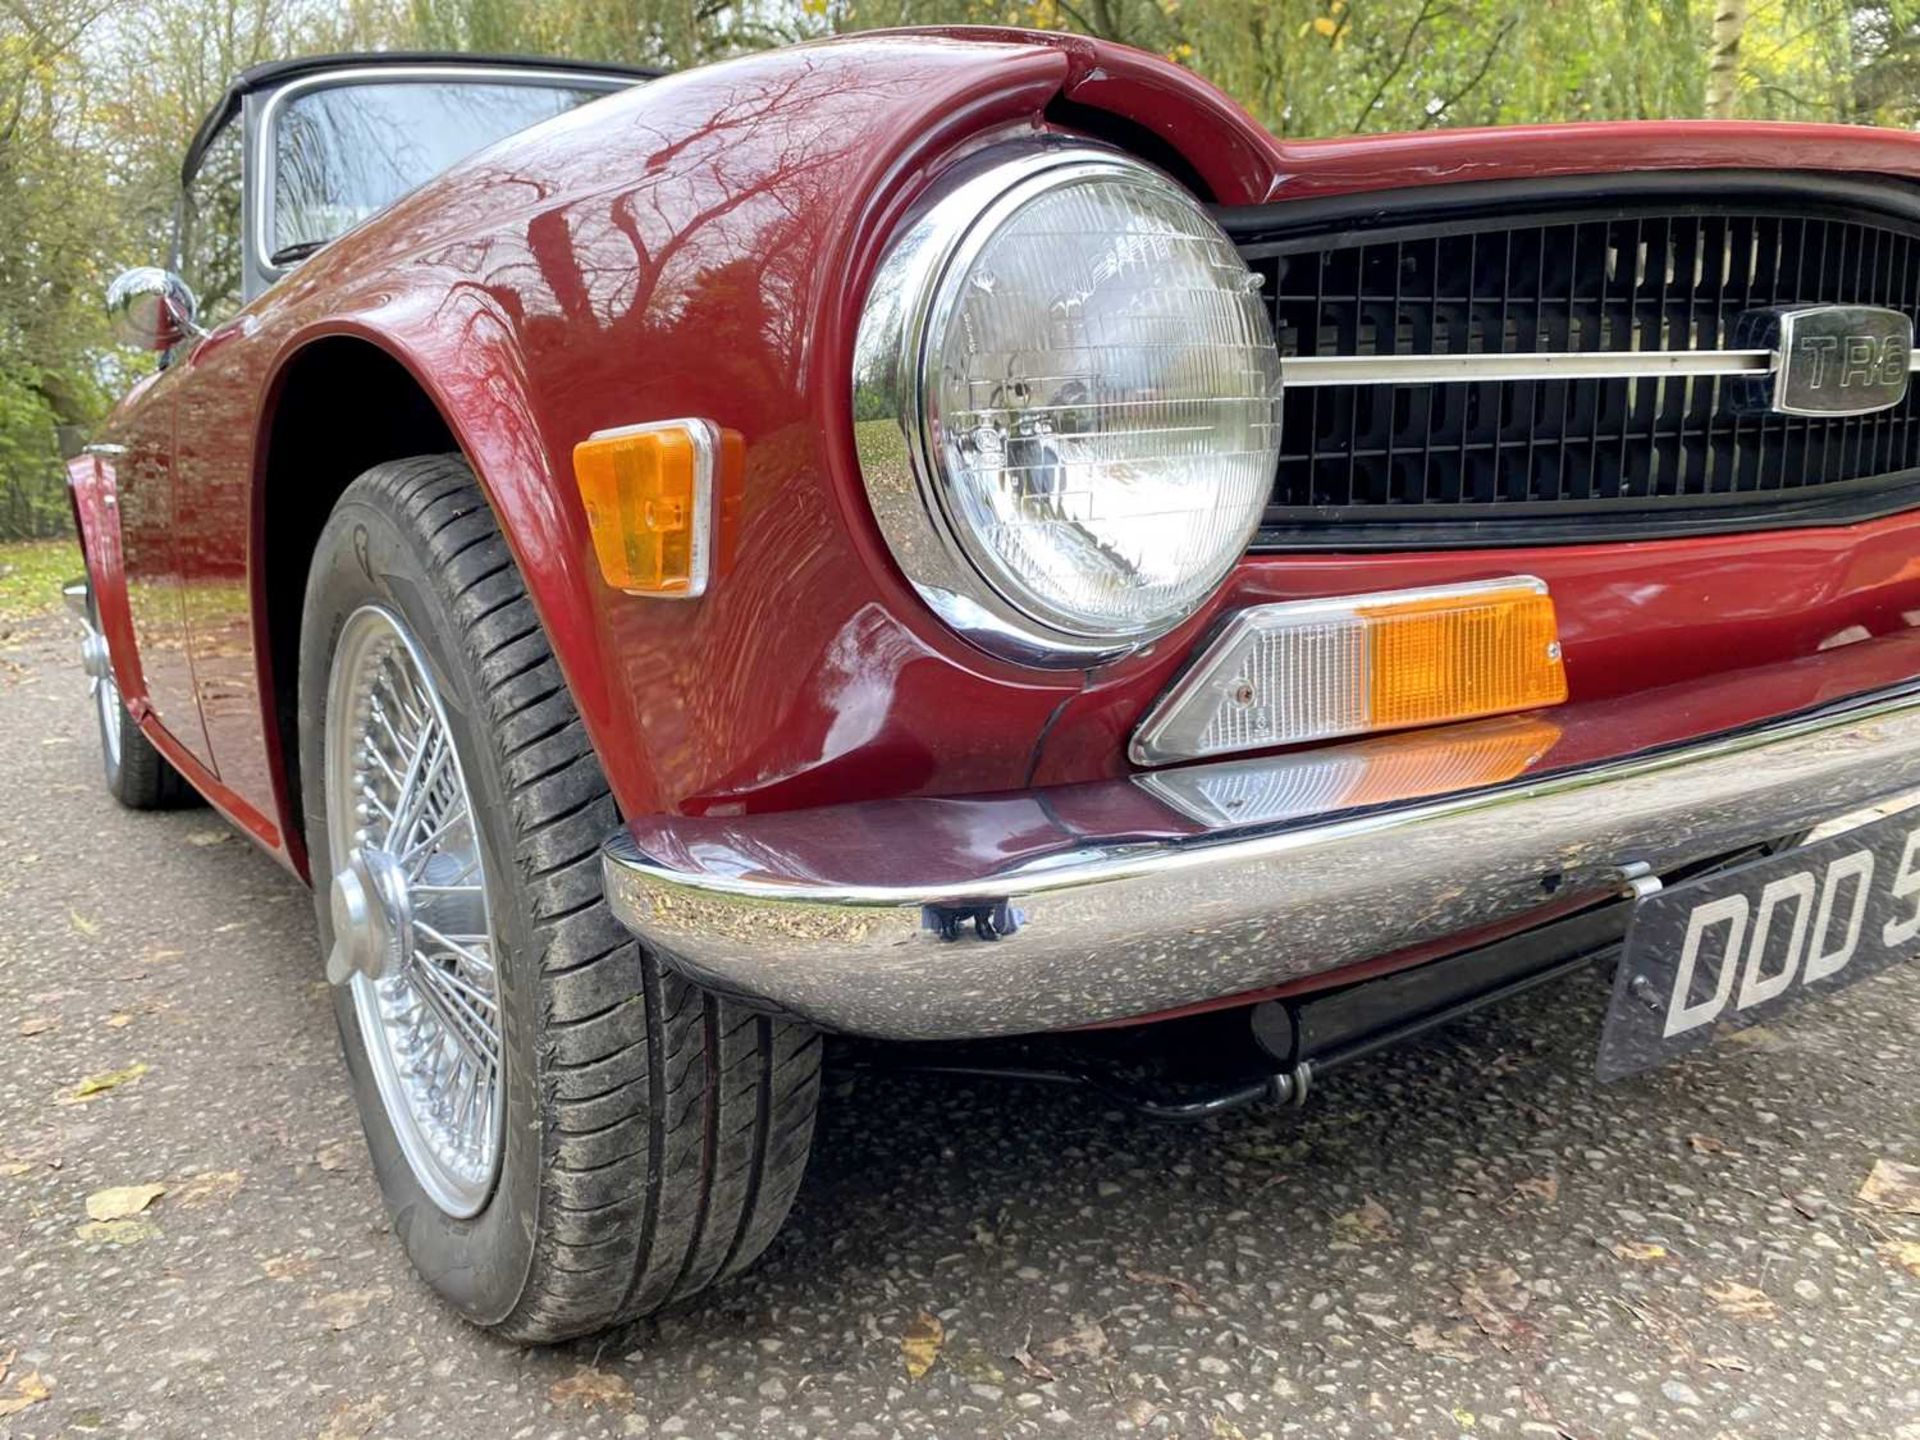 1969 Triumph TR6 Desirable early example - Image 83 of 100